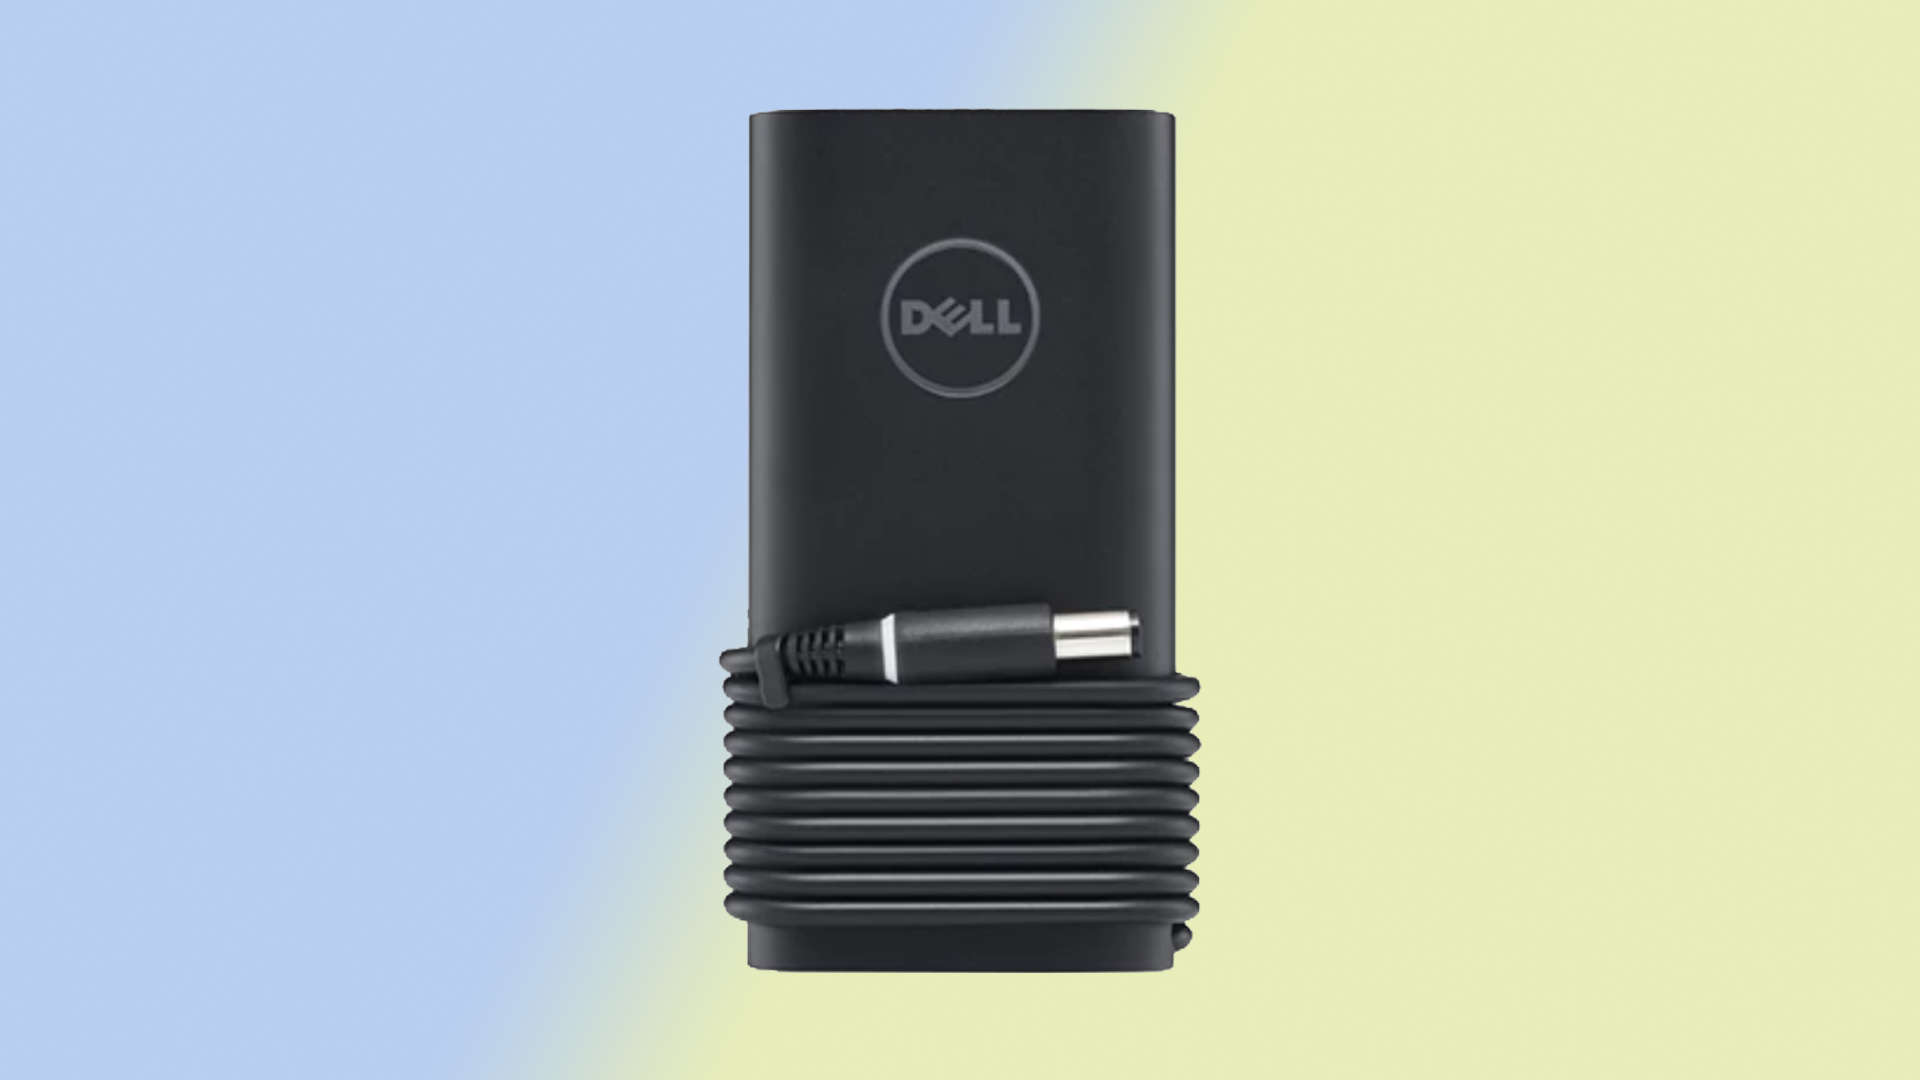 Best Dell Laptop Chargers in 2022